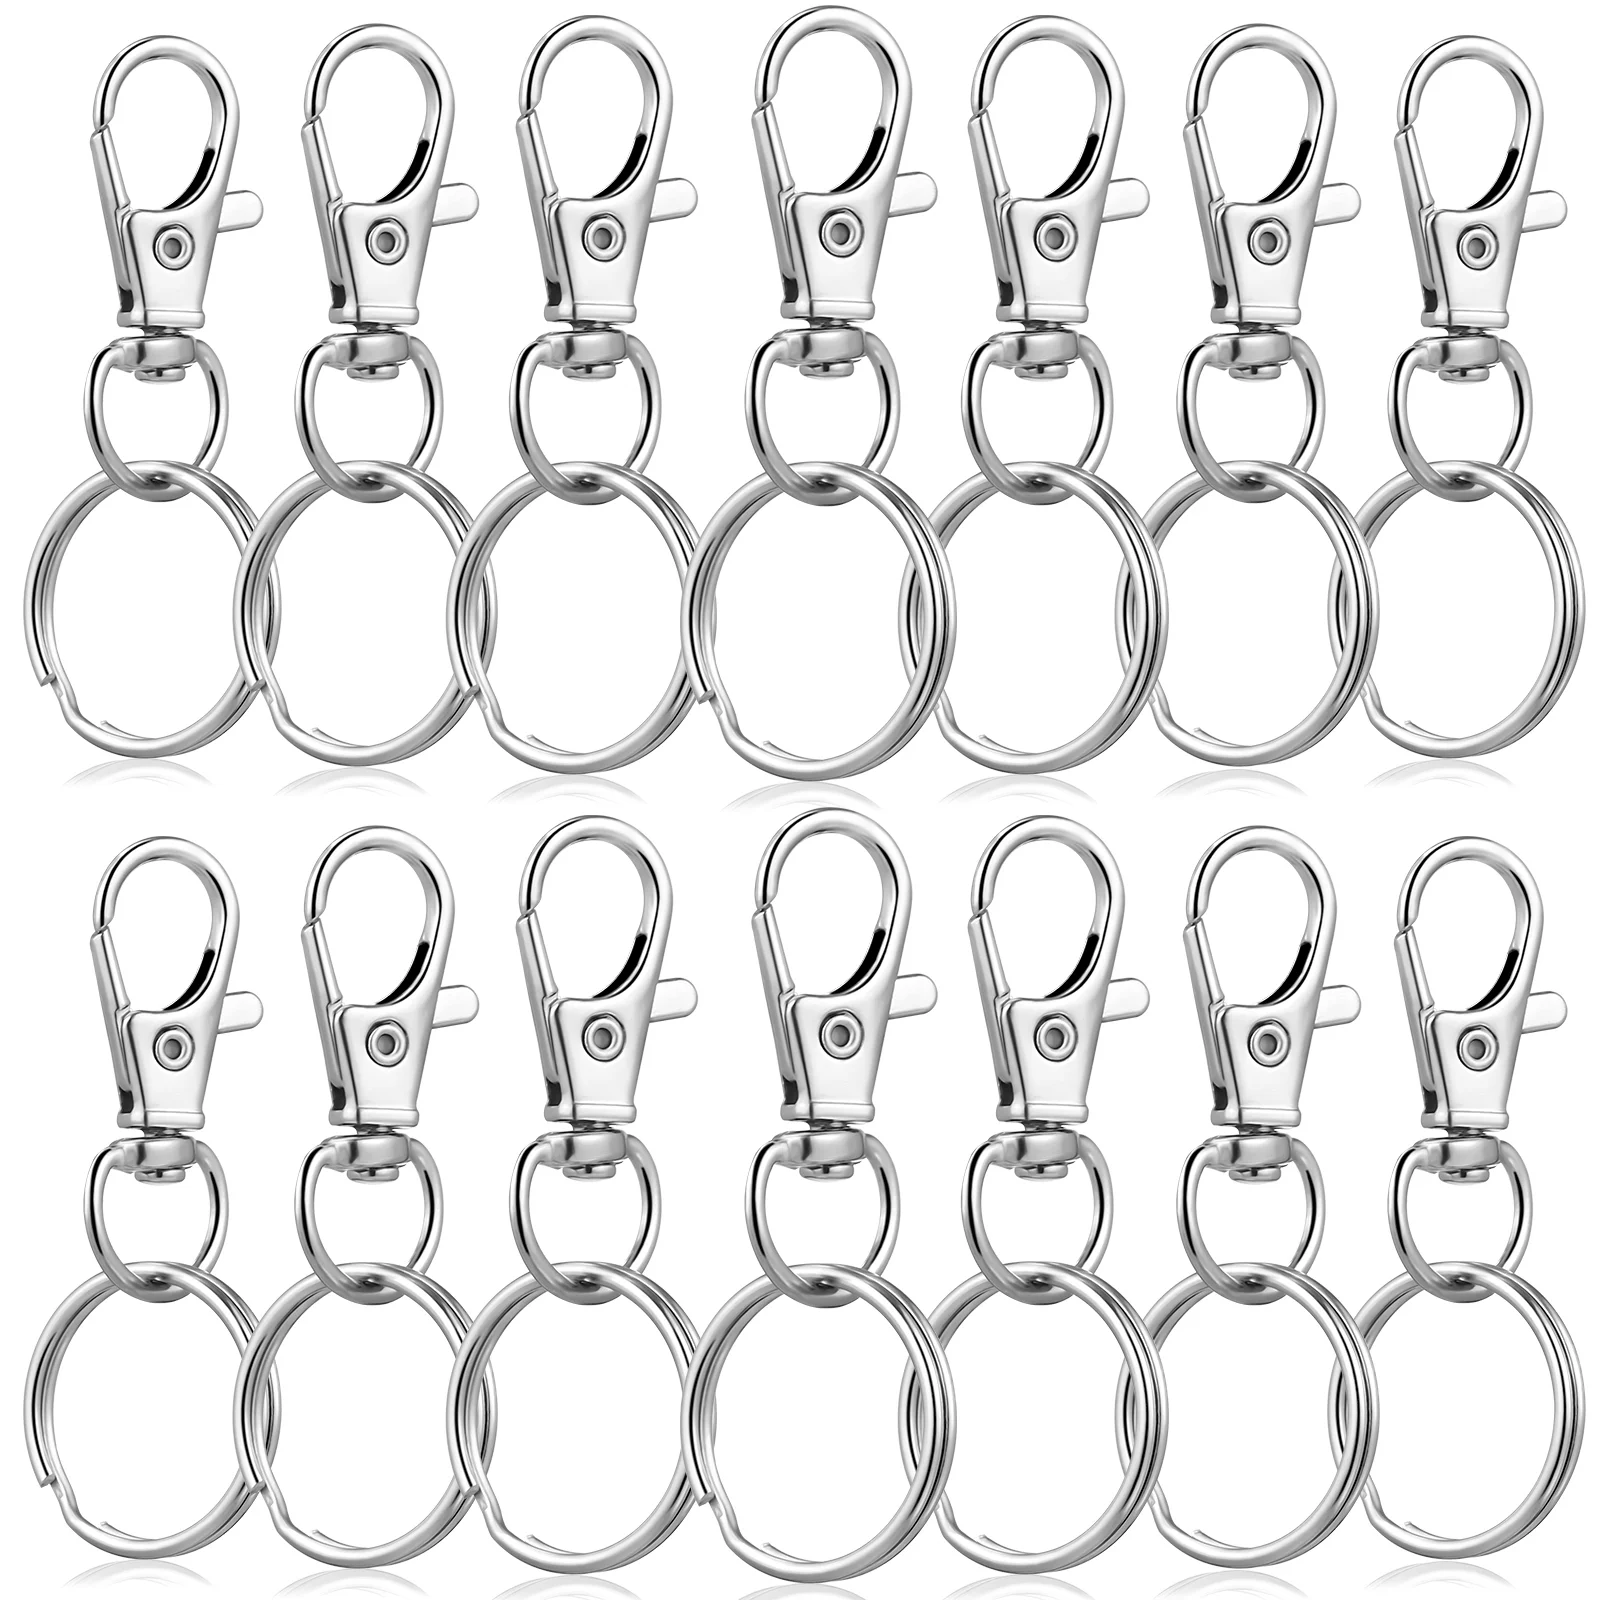 

Dog Key Ring Swivel Snap Hook Chain Clip Hooks and Rings Accessories Keychains Lanyards Crafts Auto Car